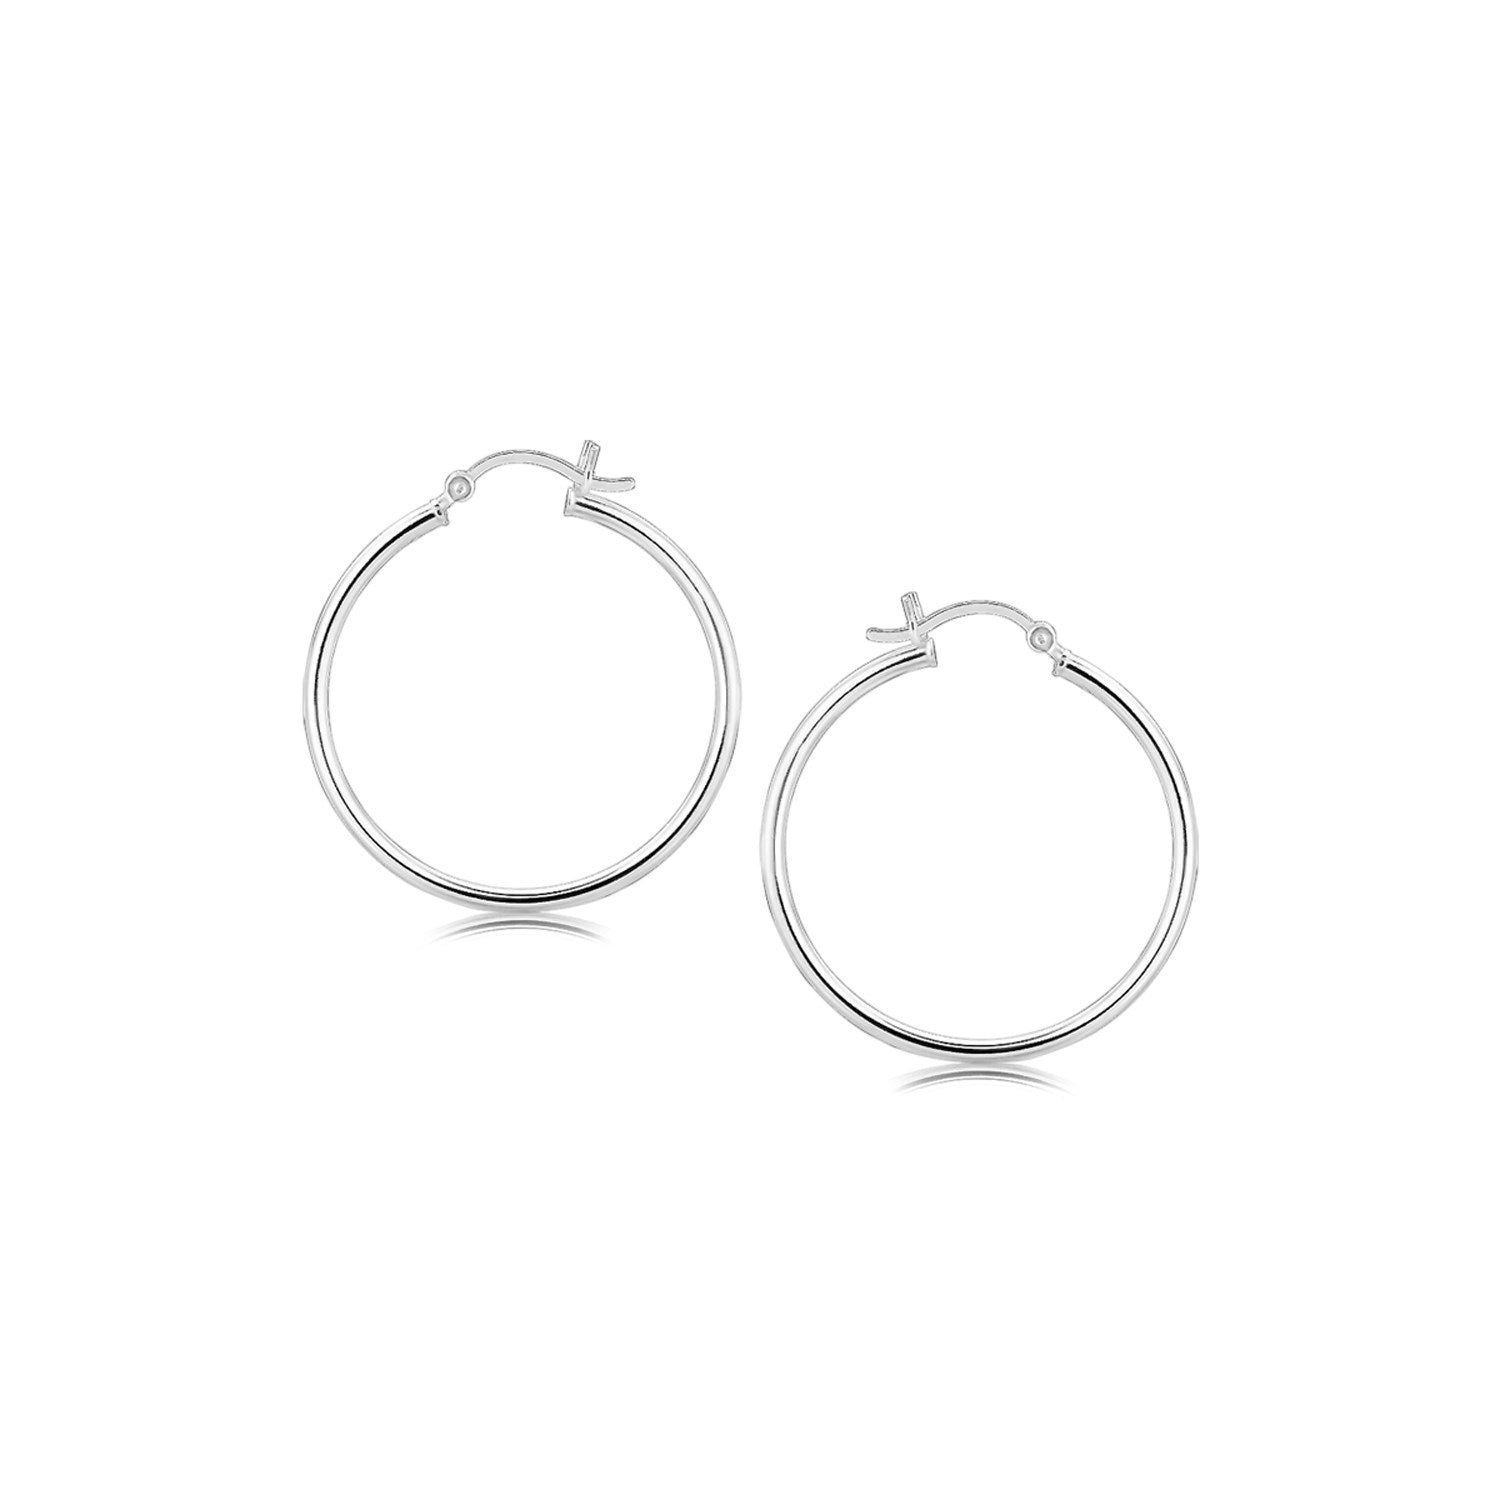 Sterling Silver Thin Polished Hoop Style Earrings with Rhodium Plating (30mm)